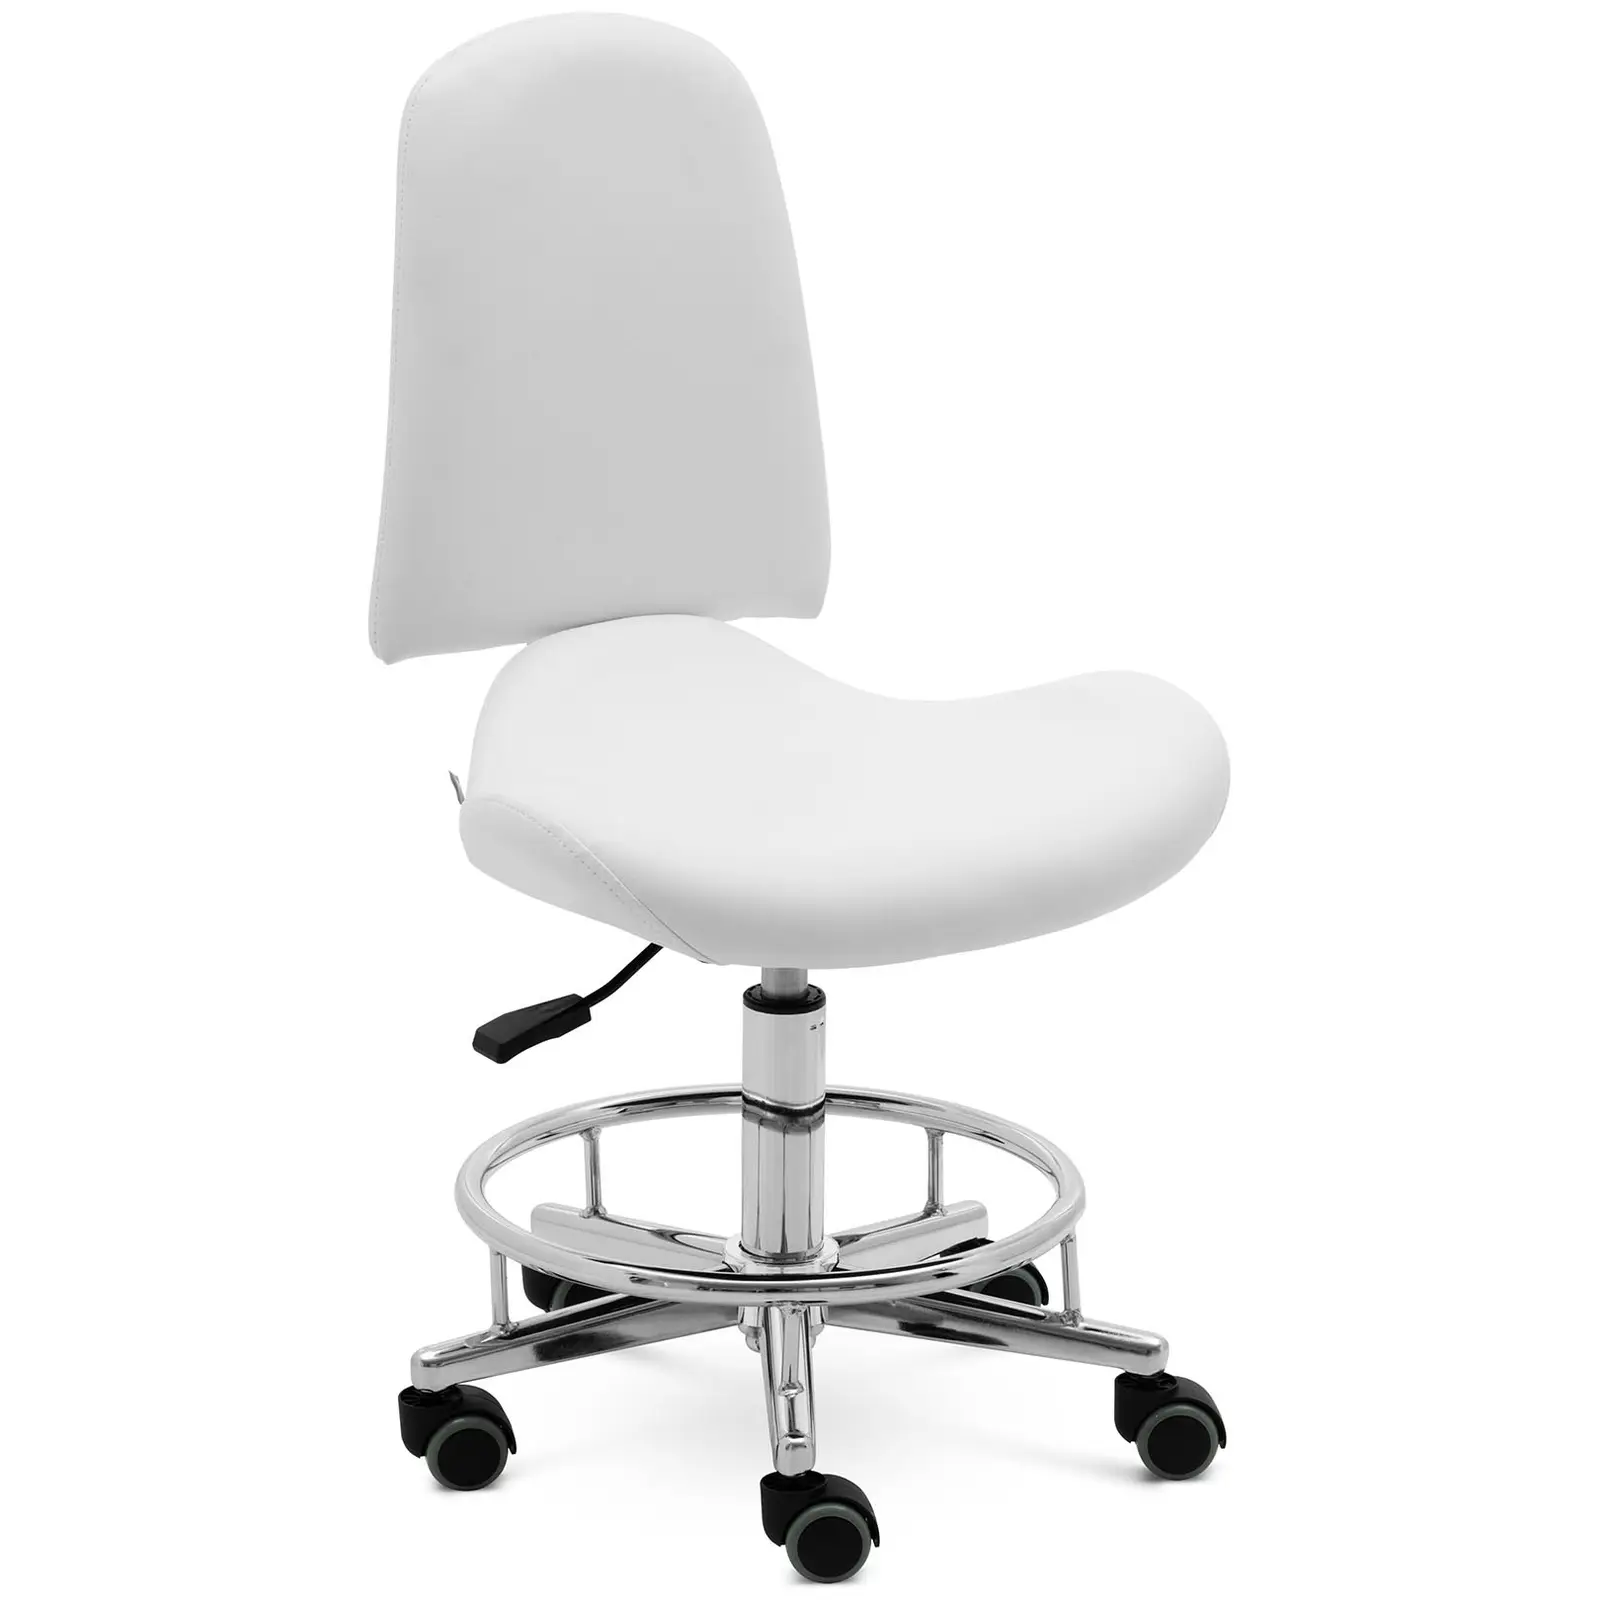 Stool Chair With Back - 44 - 58 cm - 150 kg - white